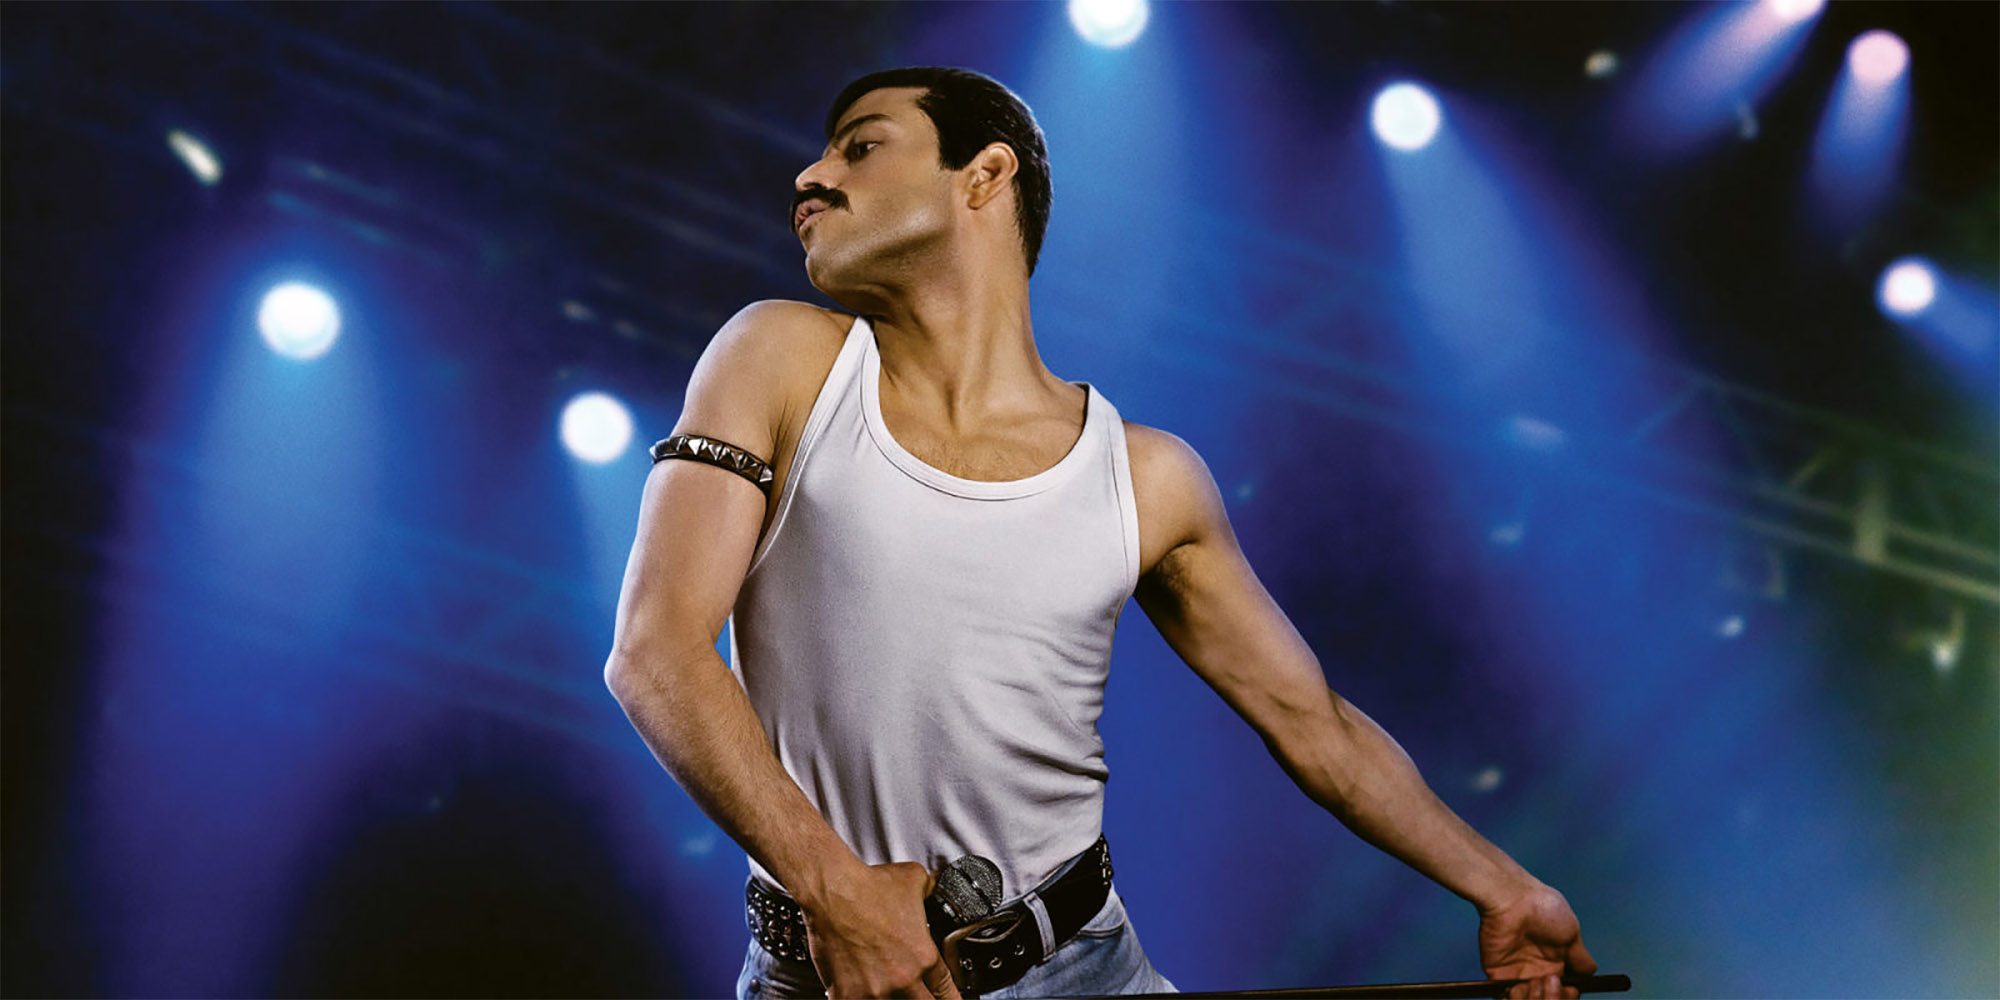 ‘Bohemian Rhapsody’ is now the most streamed track from the 20th century